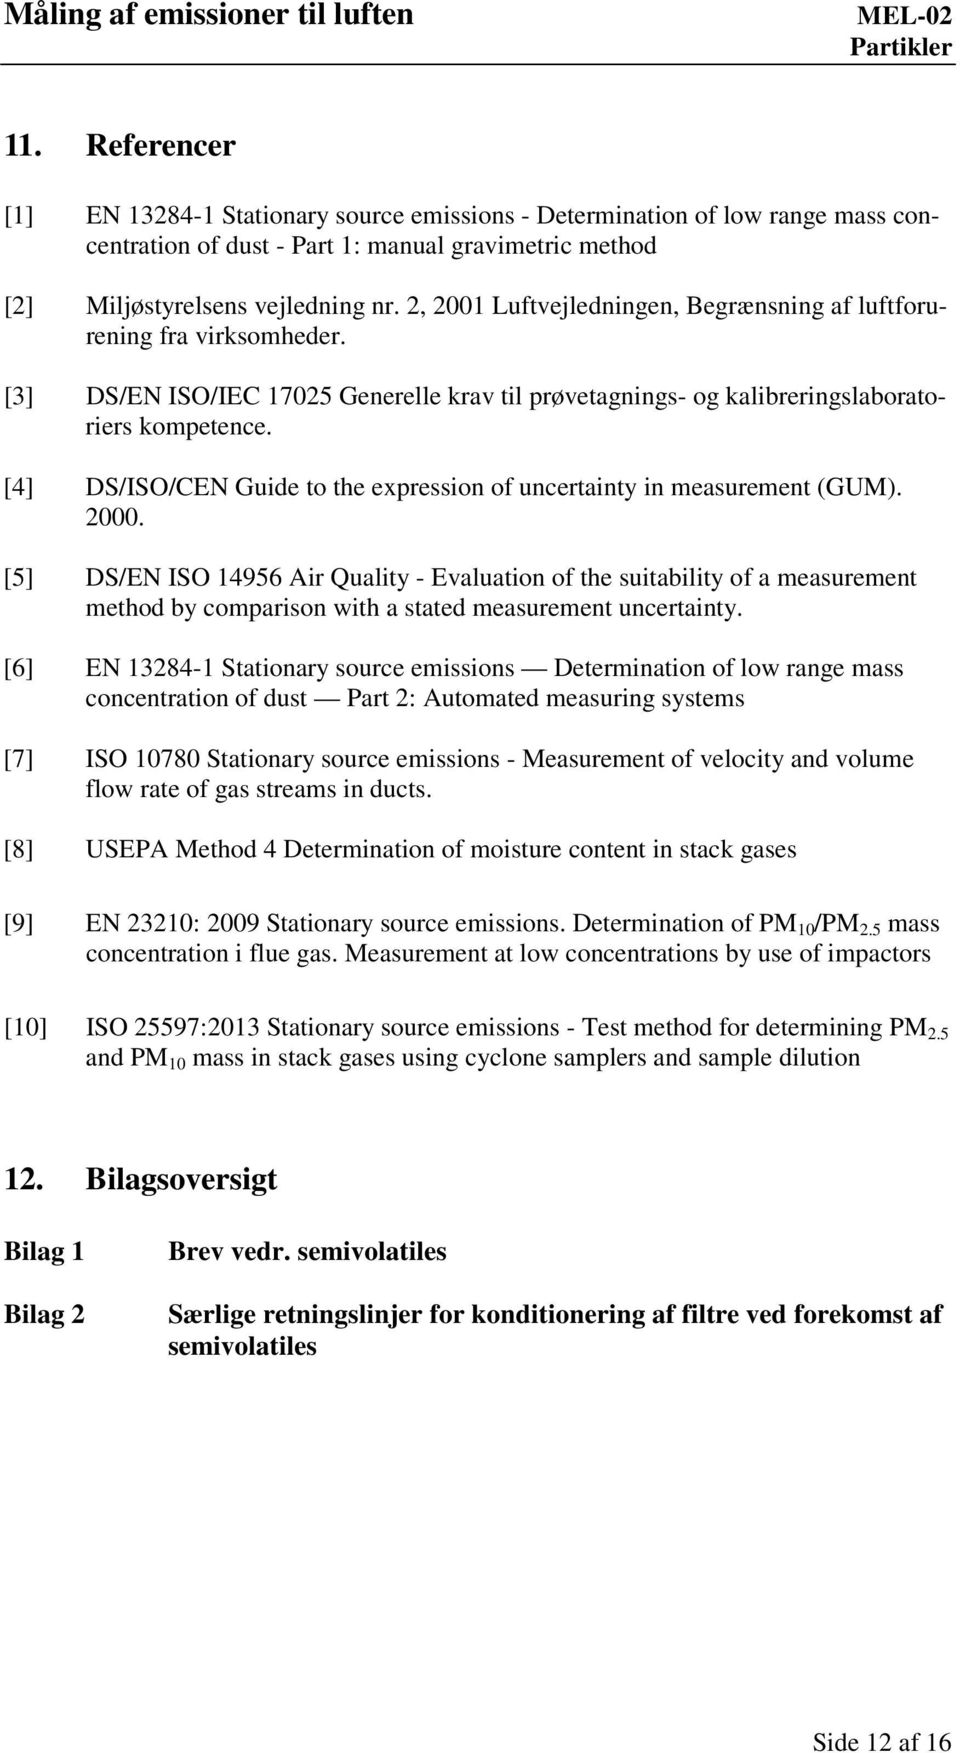 [4] DS/ISO/CEN Guide to the expression of uncertainty in measurement (GUM). 2000.